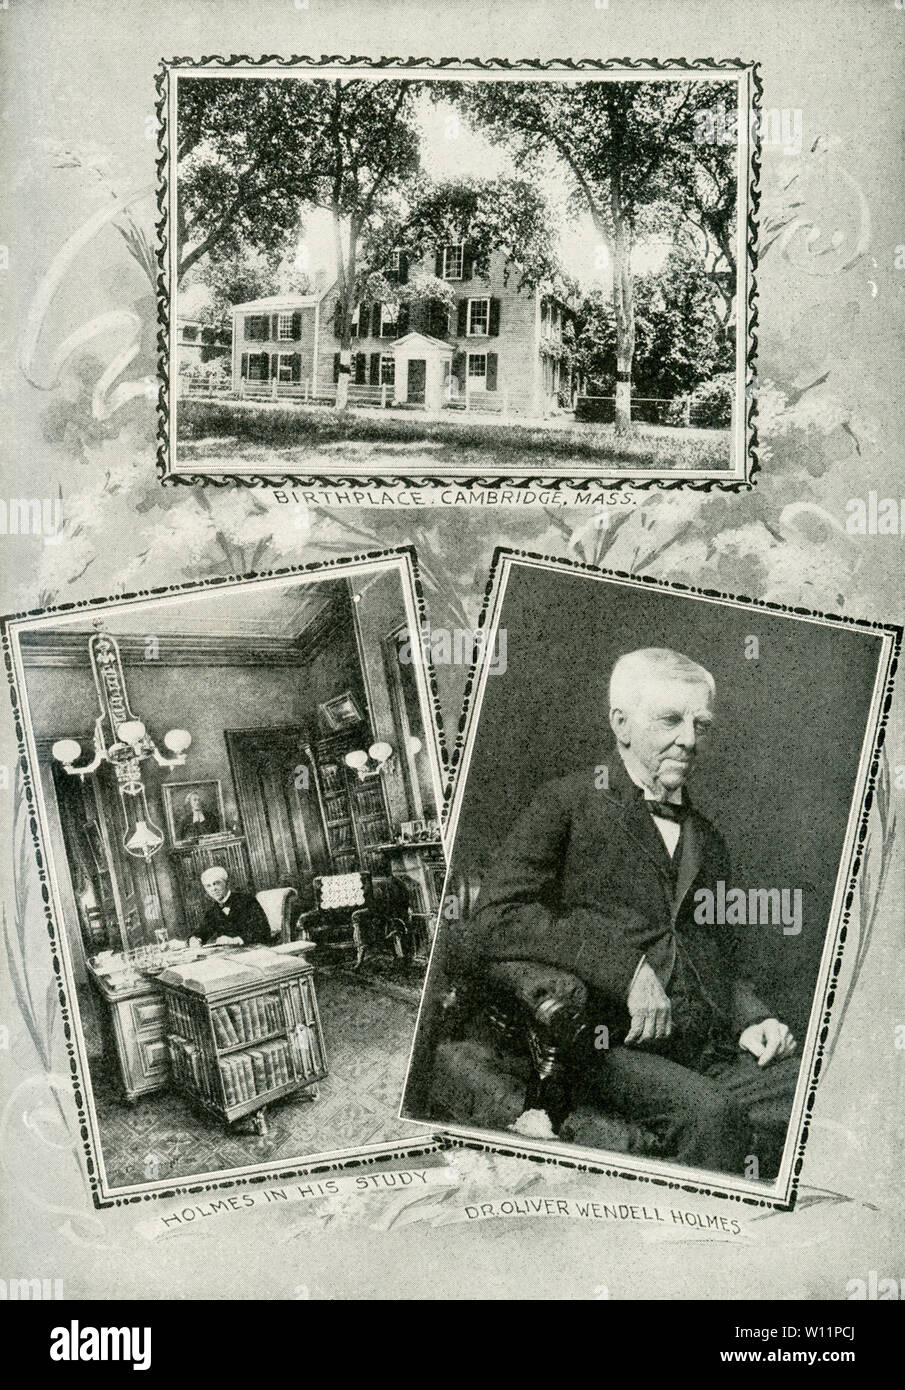 Oliver Wendell Holmes (1809-1894) The Poet’s Birthplace and Study. Successively law student, physician, and Harvard professor of anatomy, Holmes’ undying fame rests on his authorship. “The Autocrat at the Breakfast Table” was beloved for his geniality, of which these intimate photographs give some suggestions. Stock Photo